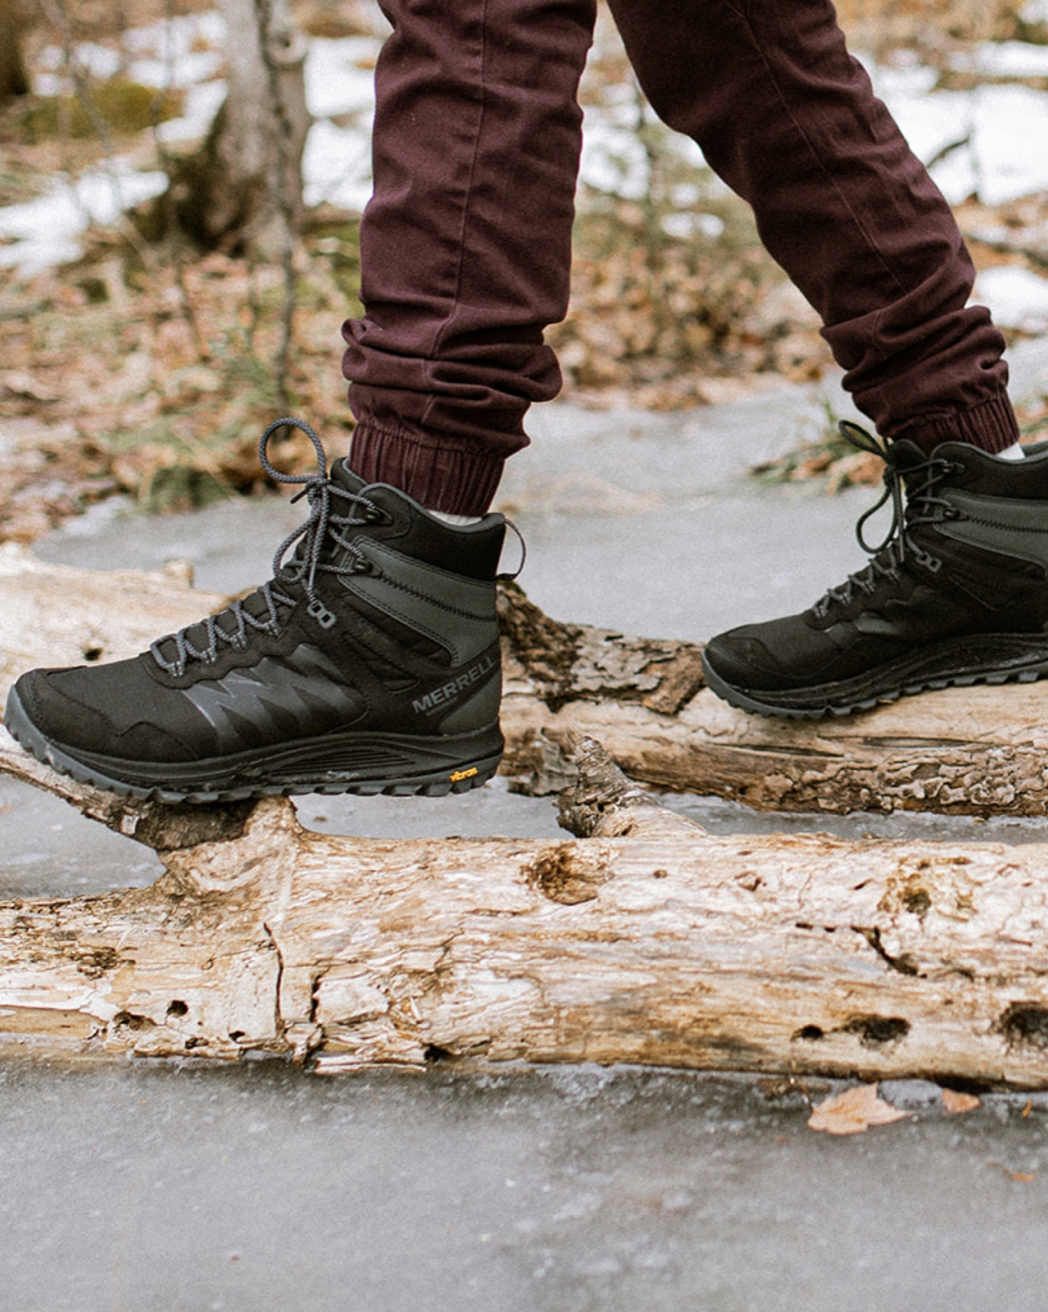 Top 5 winter hiking boots